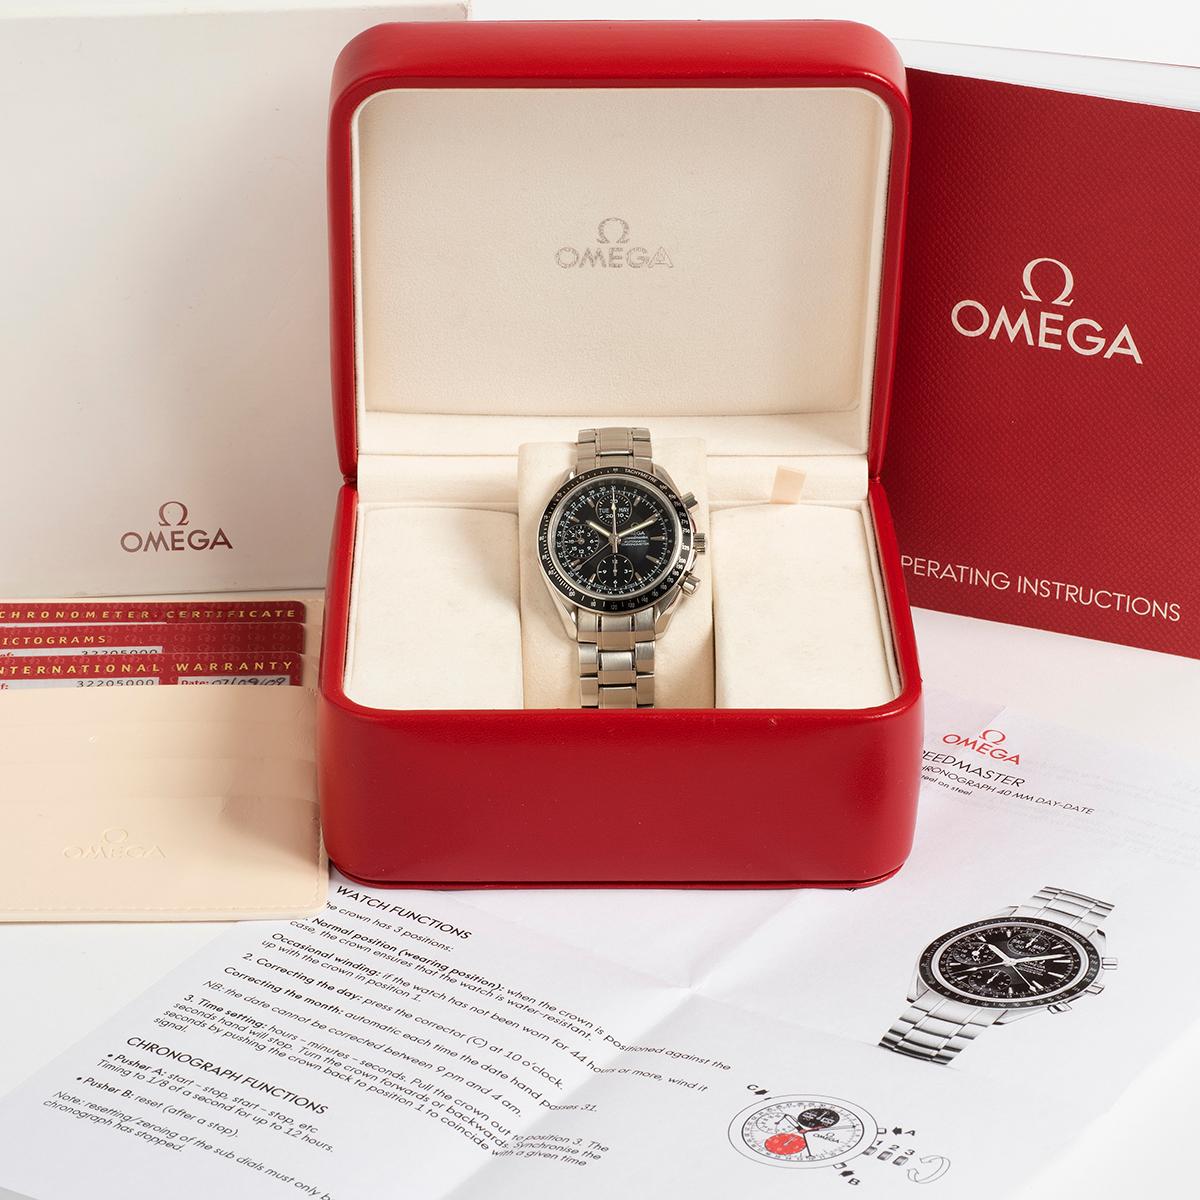 Our Omega Speedmaster Triple Date (Day/ Date/ Month) features the more desirable black dial with stainless steel (40mm) case and stainless steel bracelet. A complete set in outstanding condition with only light signs of use from new, our example of